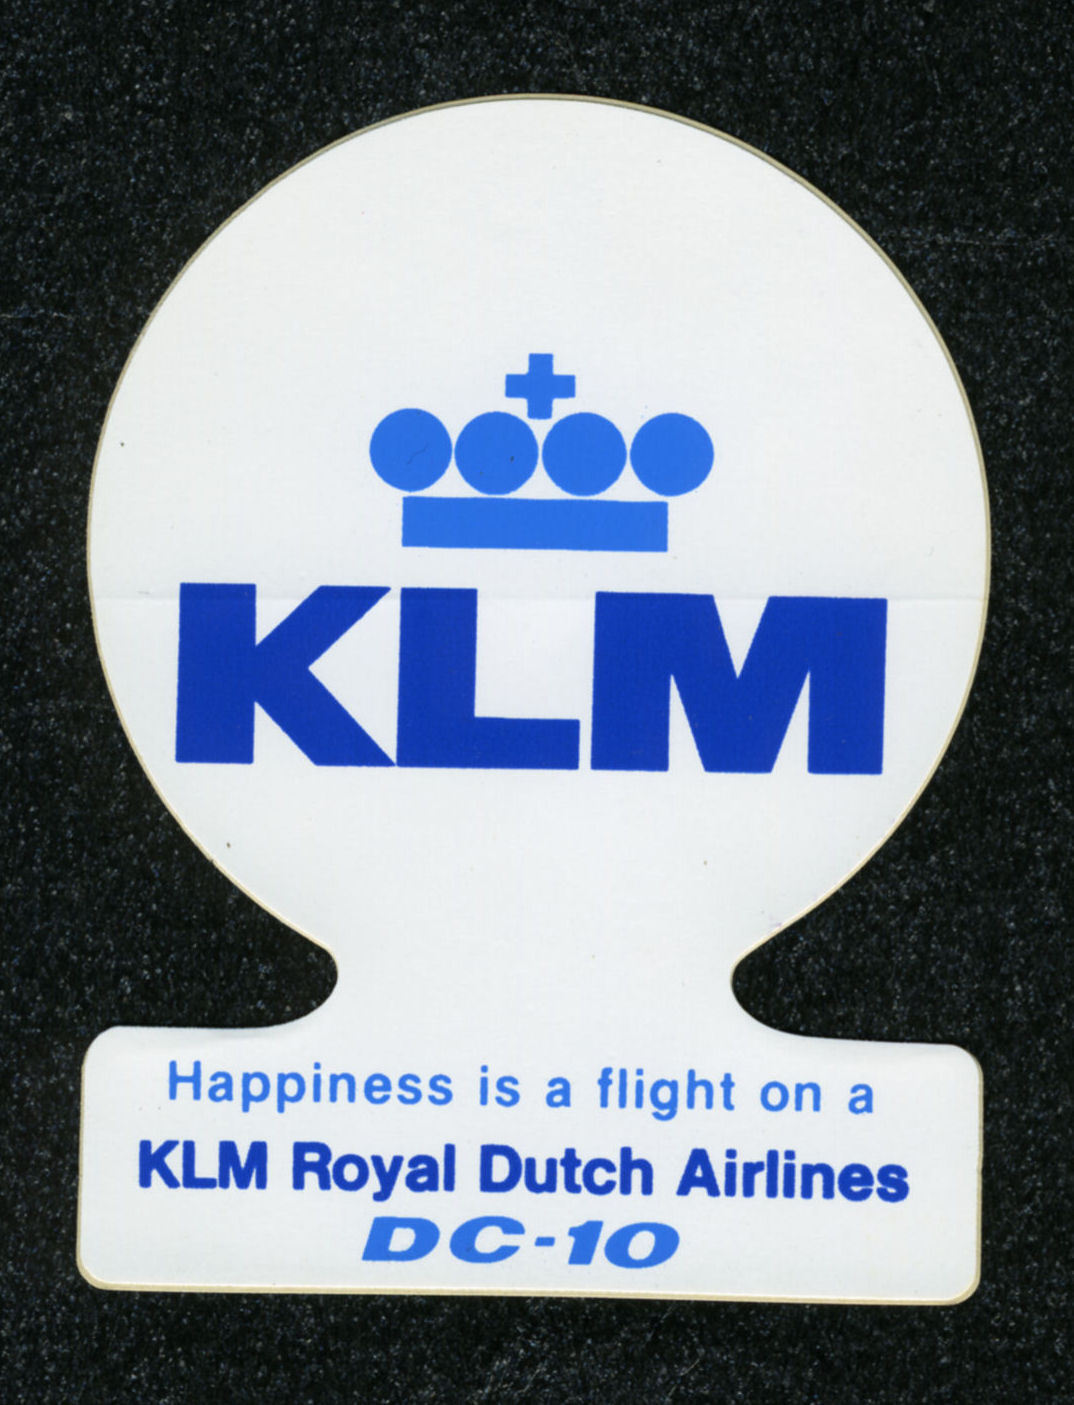 DC-10 KLM STICKER - HAPPINESS IS A FLIGHT ON A KLM ROYAL DUTCH AIRLINES DC-10